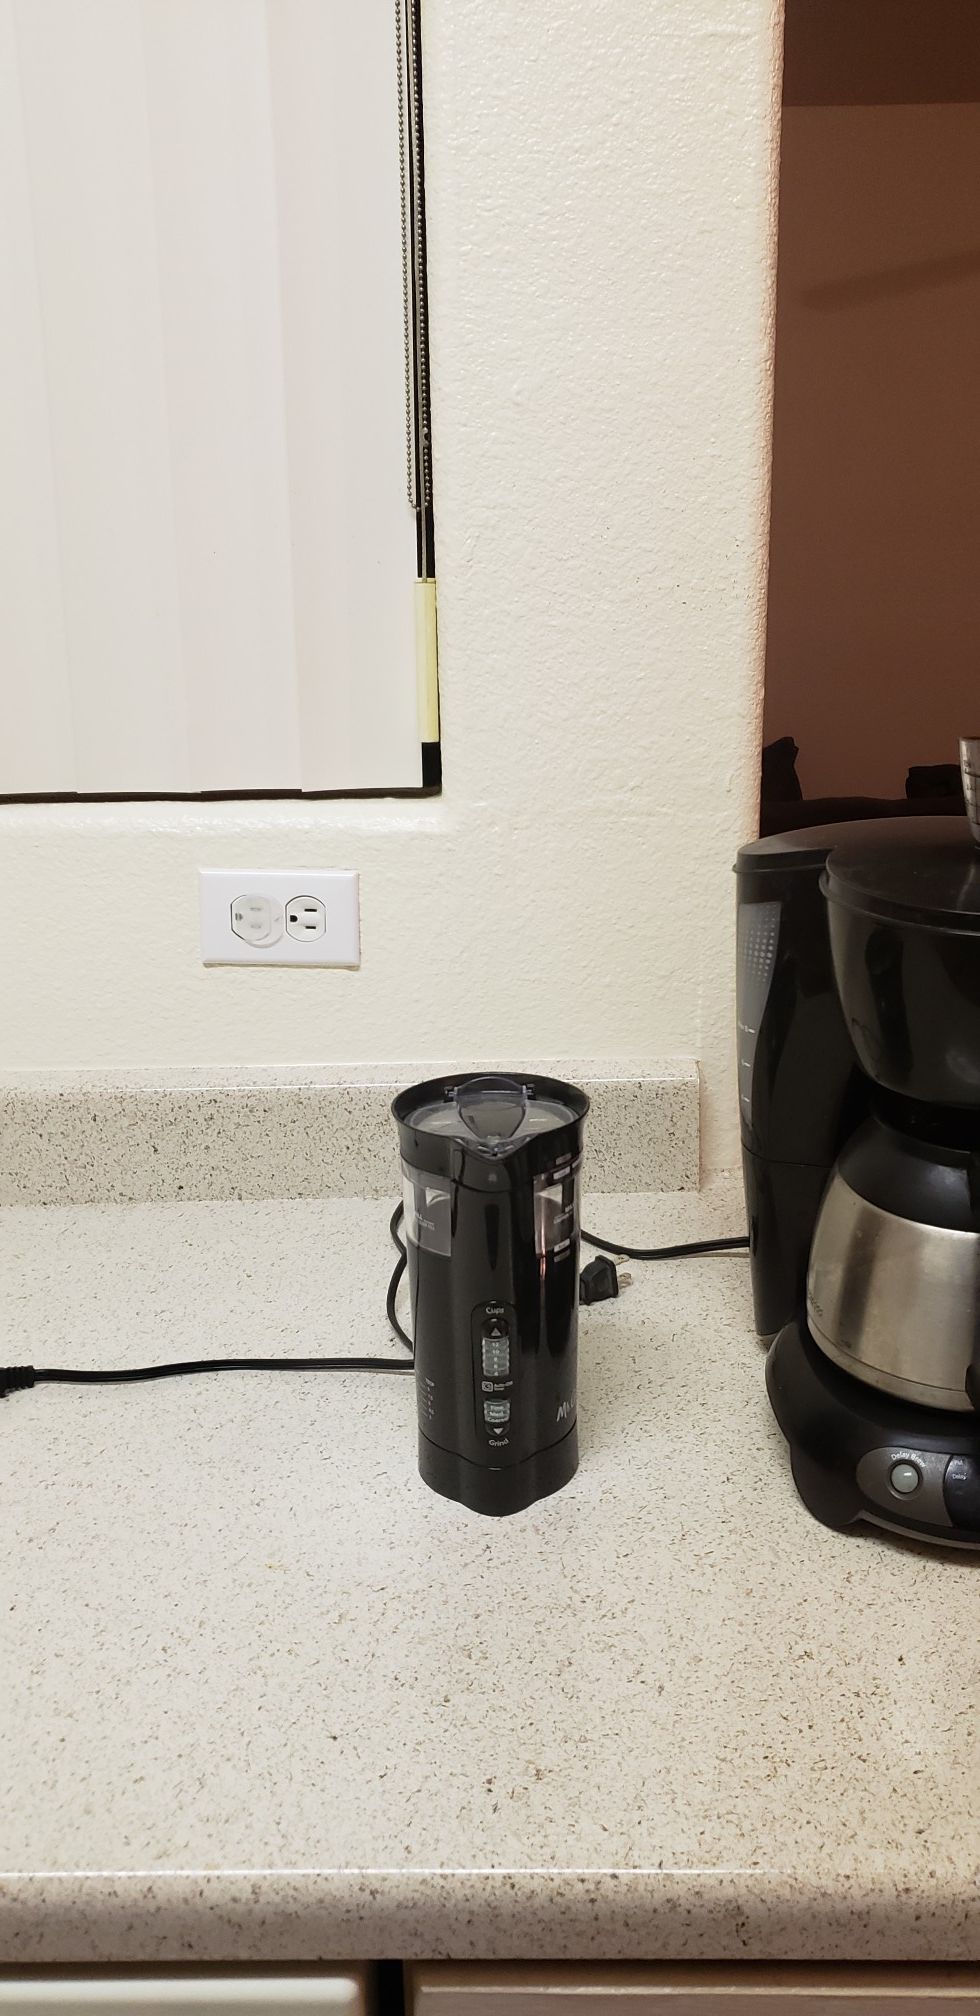 Coffee grinder, coffee maker and pot, tea brewer and crock pot